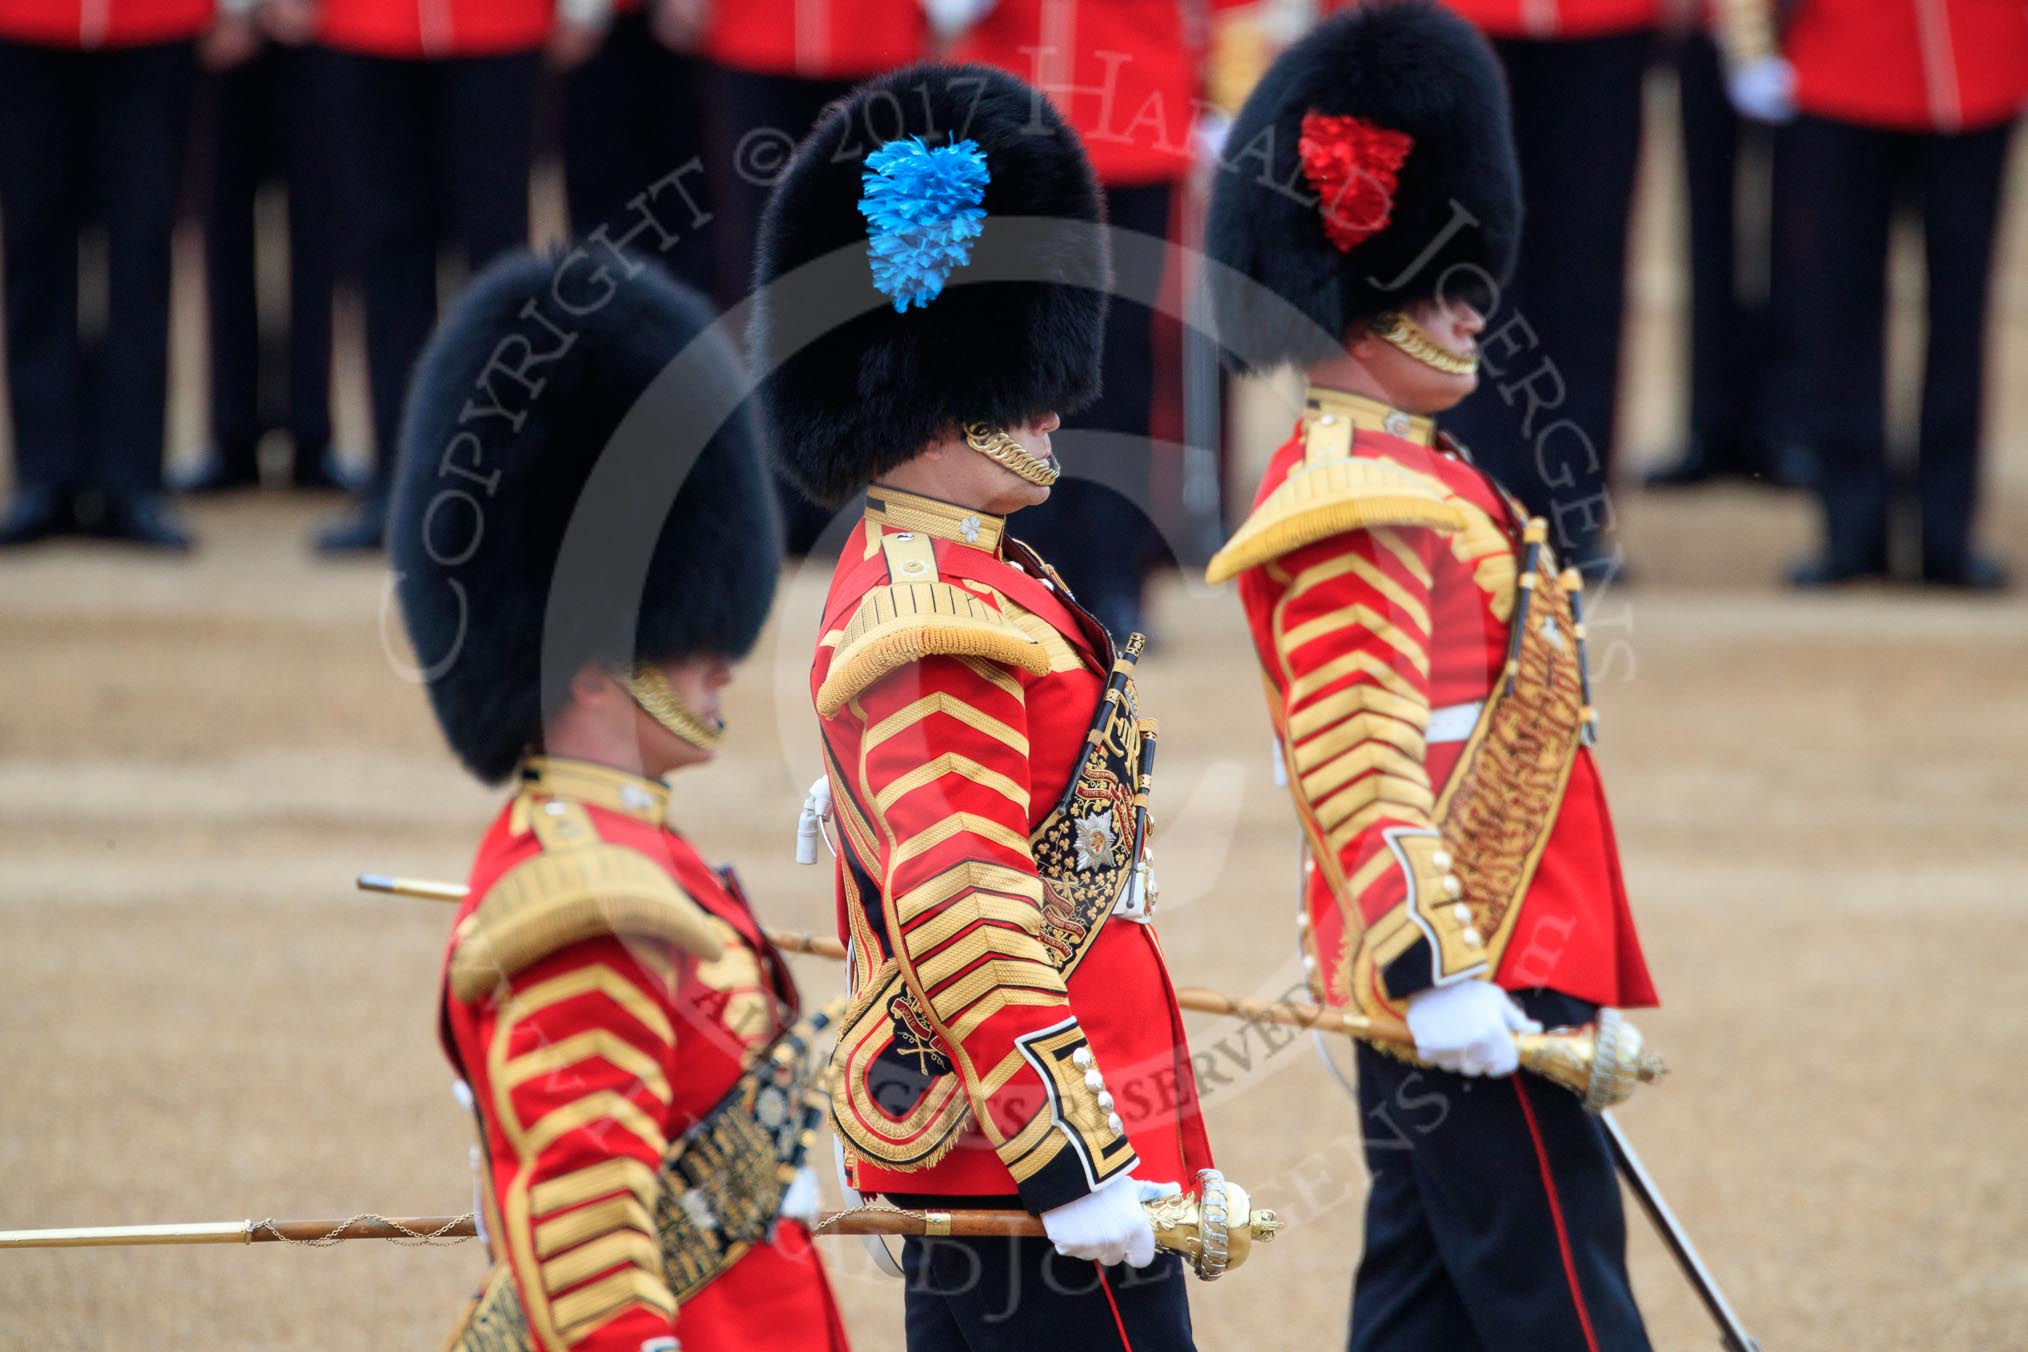 during The Colonel's Review {iptcyear4} (final rehearsal for Trooping the Colour, The Queen's Birthday Parade)  at Horse Guards Parade, Westminster, London, 2 June 2018, 11:08.